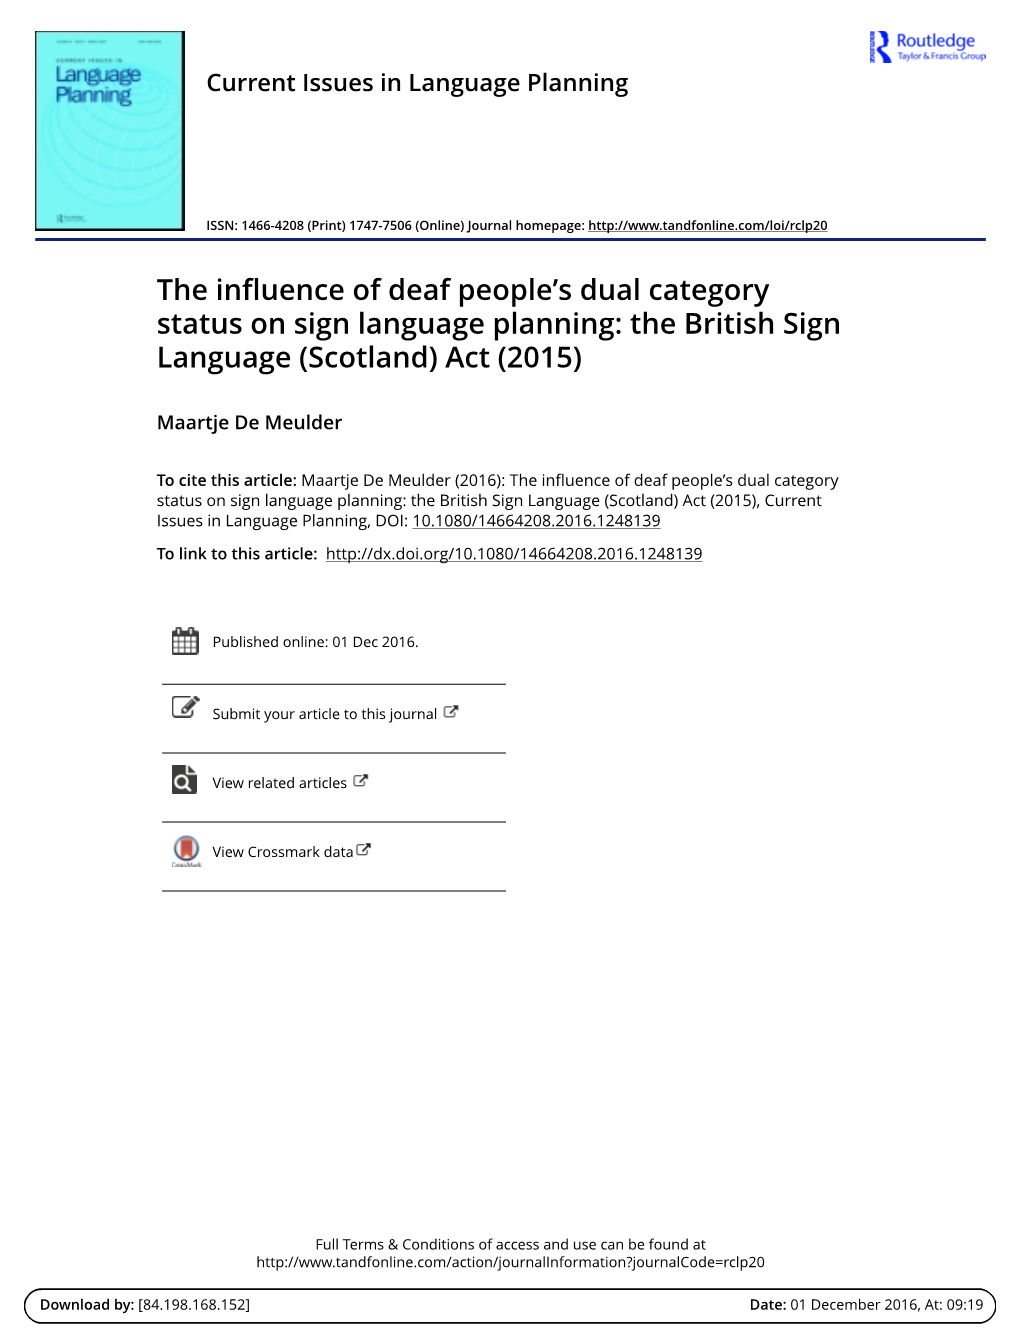 The Influence of Deaf People's Dual Category Status on Sign Language Planning